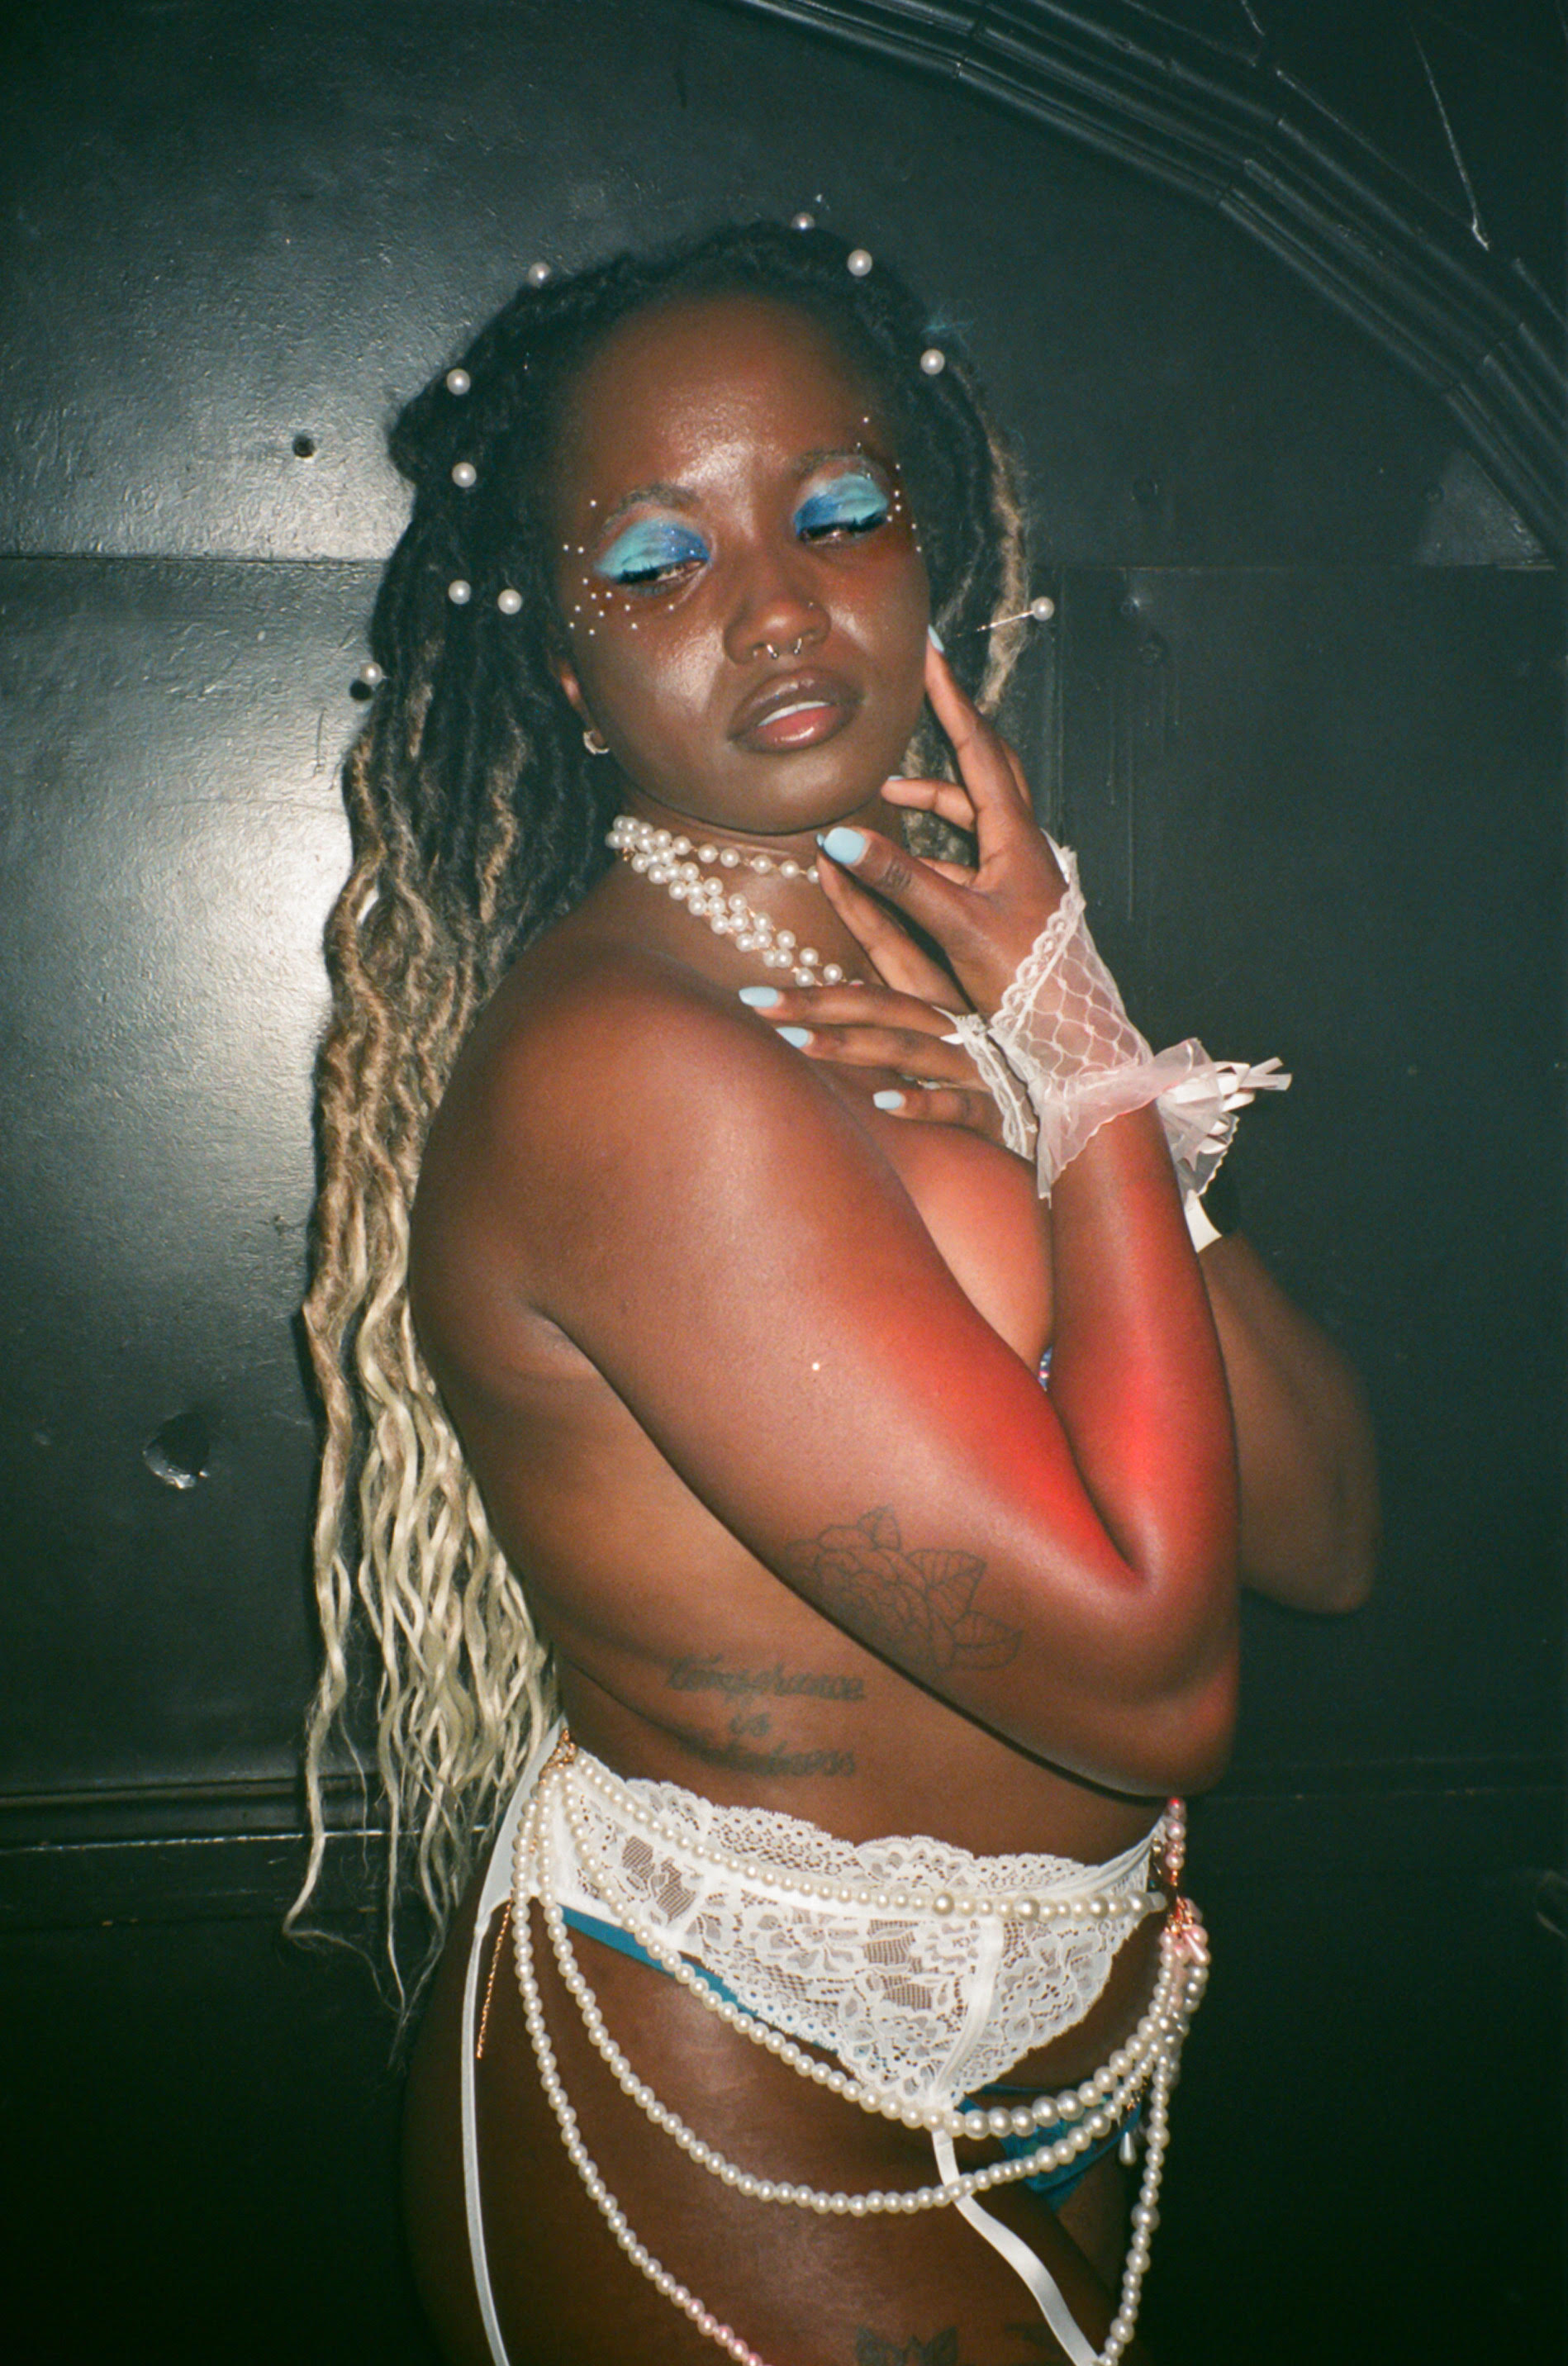 Person with dreads and blue eyeshadow in white lace lingerie